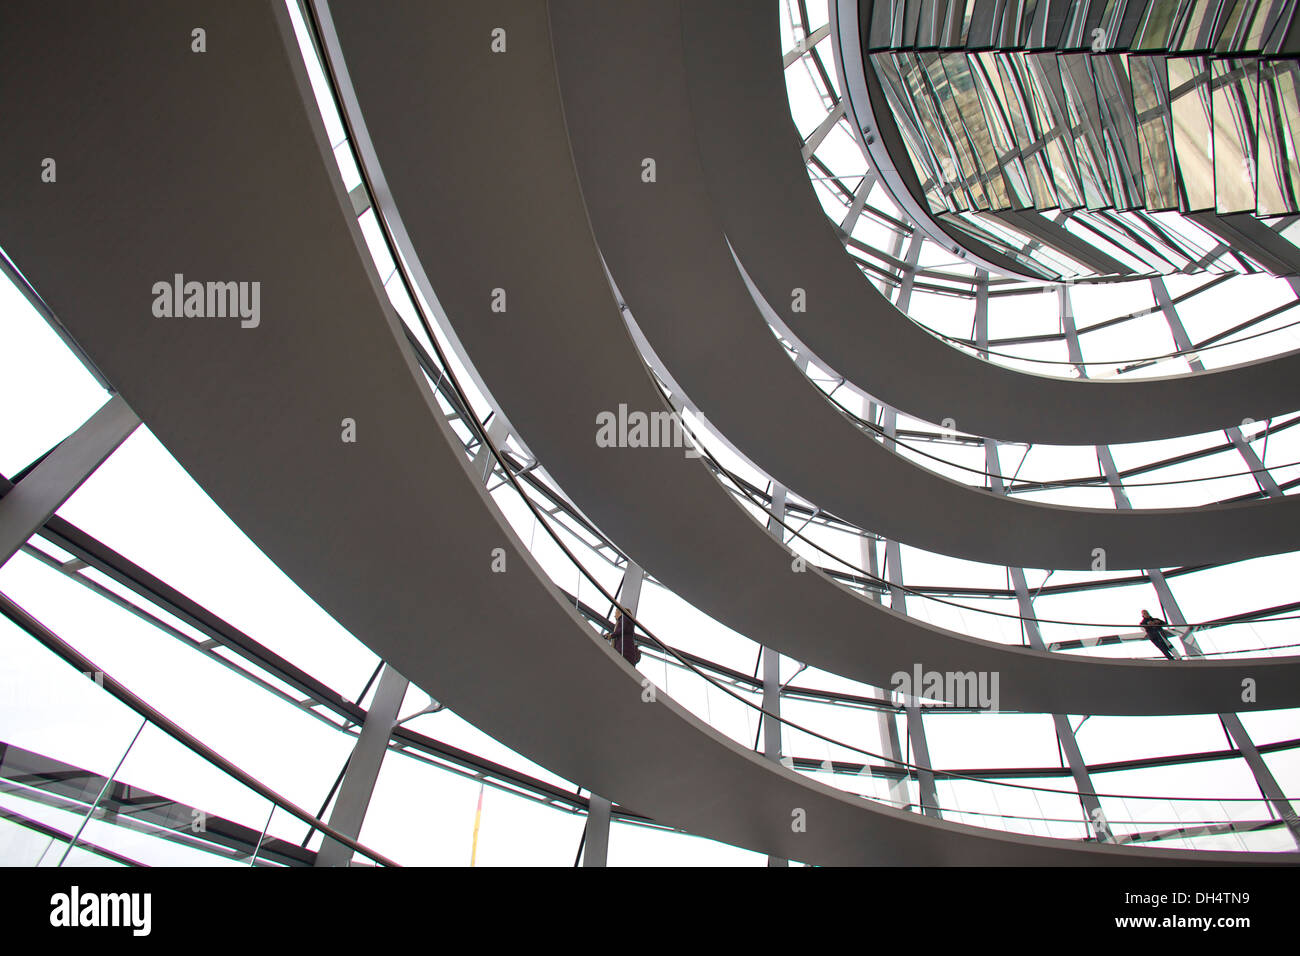 Reichstag Dome, Berlin, Germany, Europe. Stock Photo